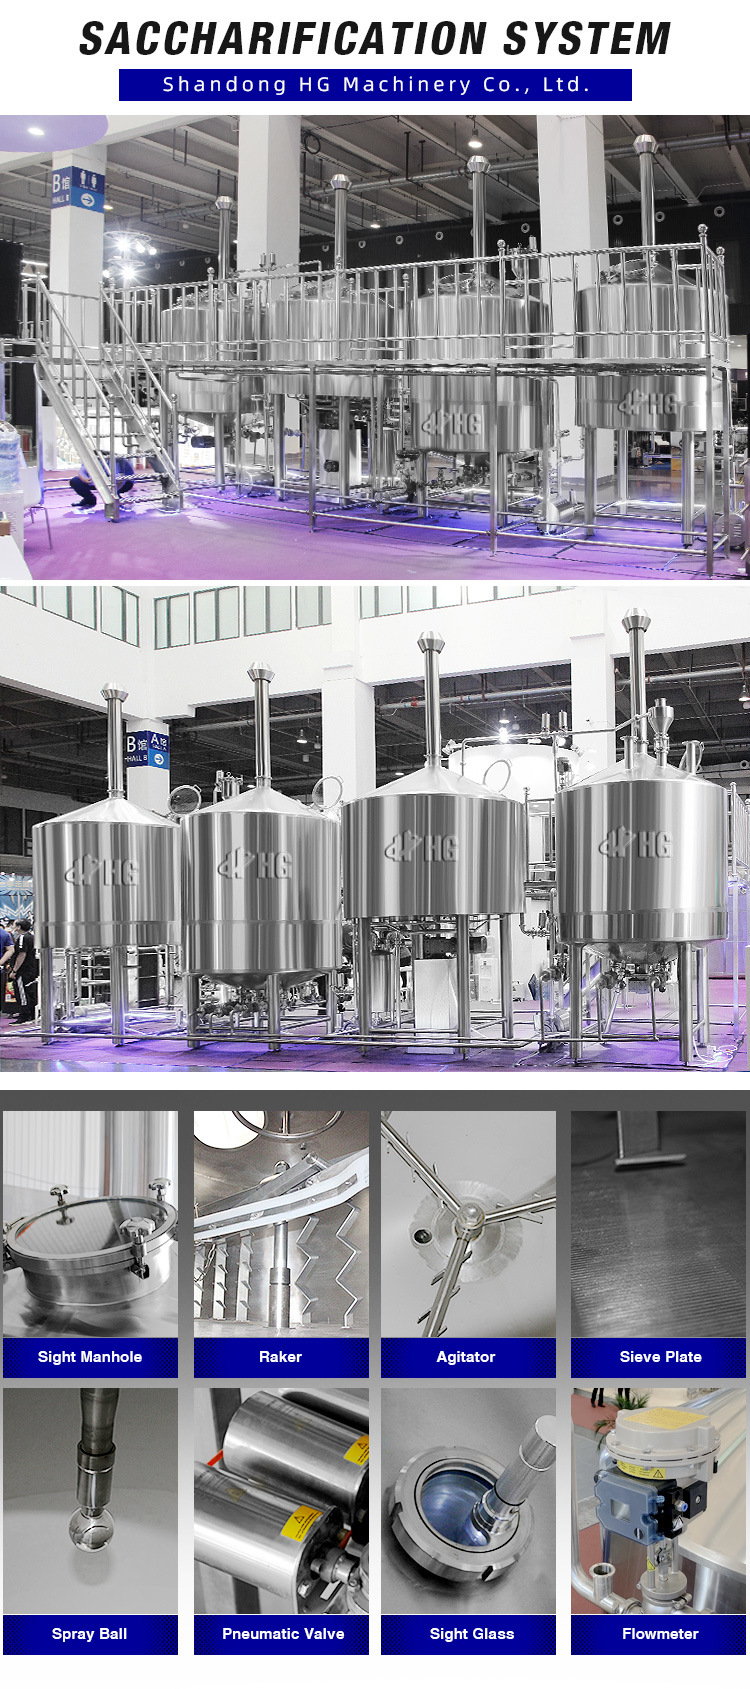 2000L Brewing Equipment Used Brewing Equipment